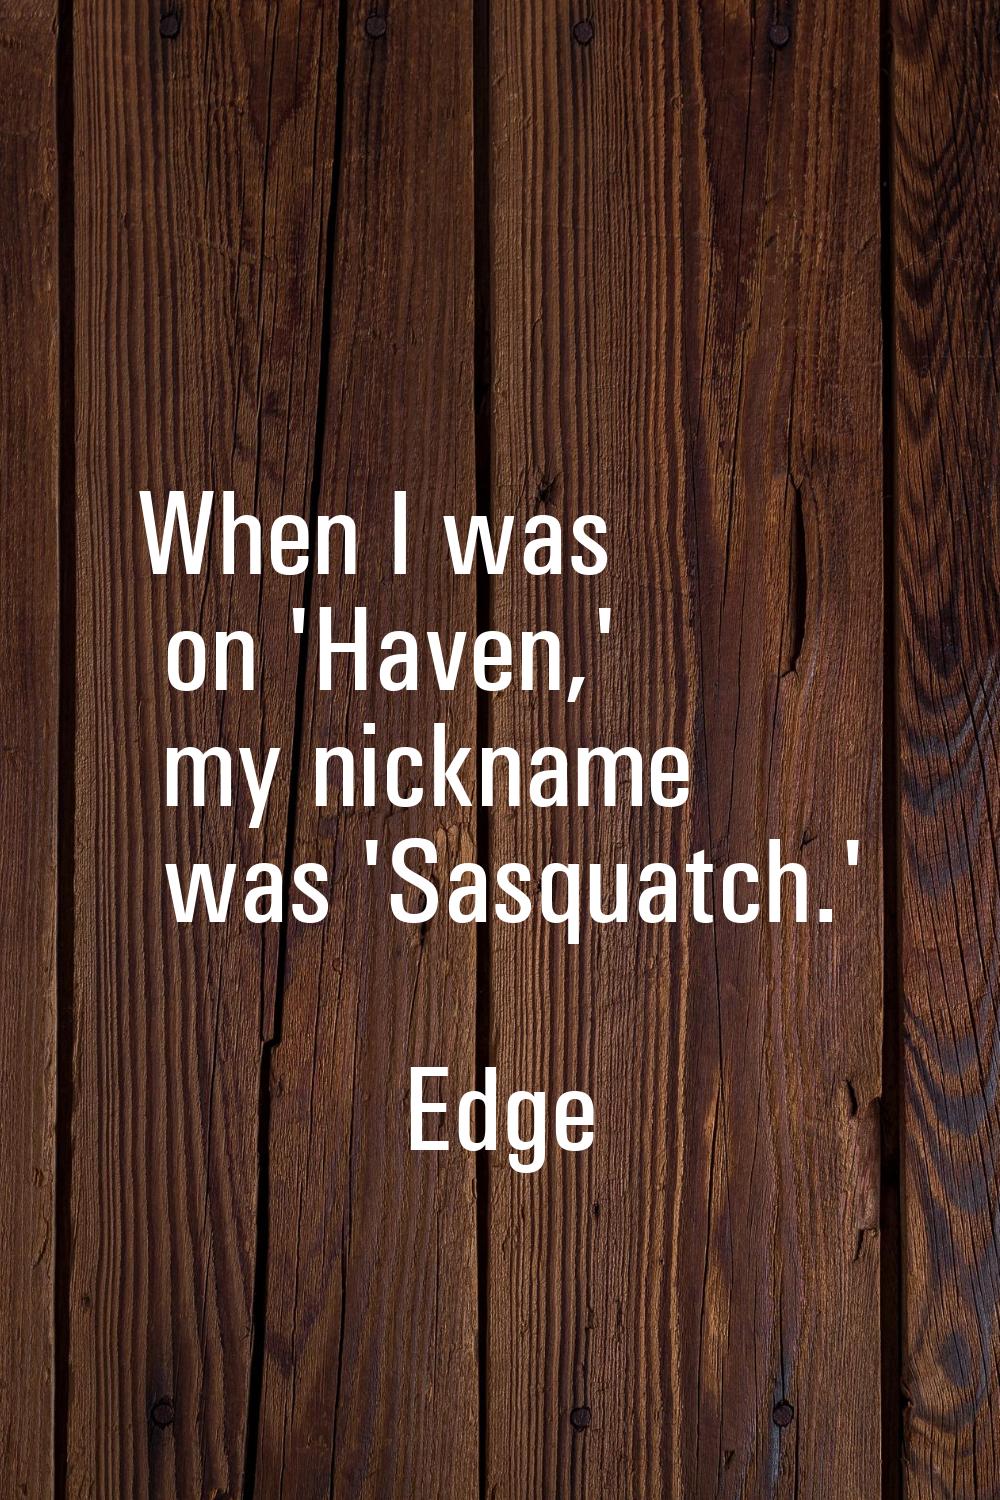 When I was on 'Haven,' my nickname was 'Sasquatch.'